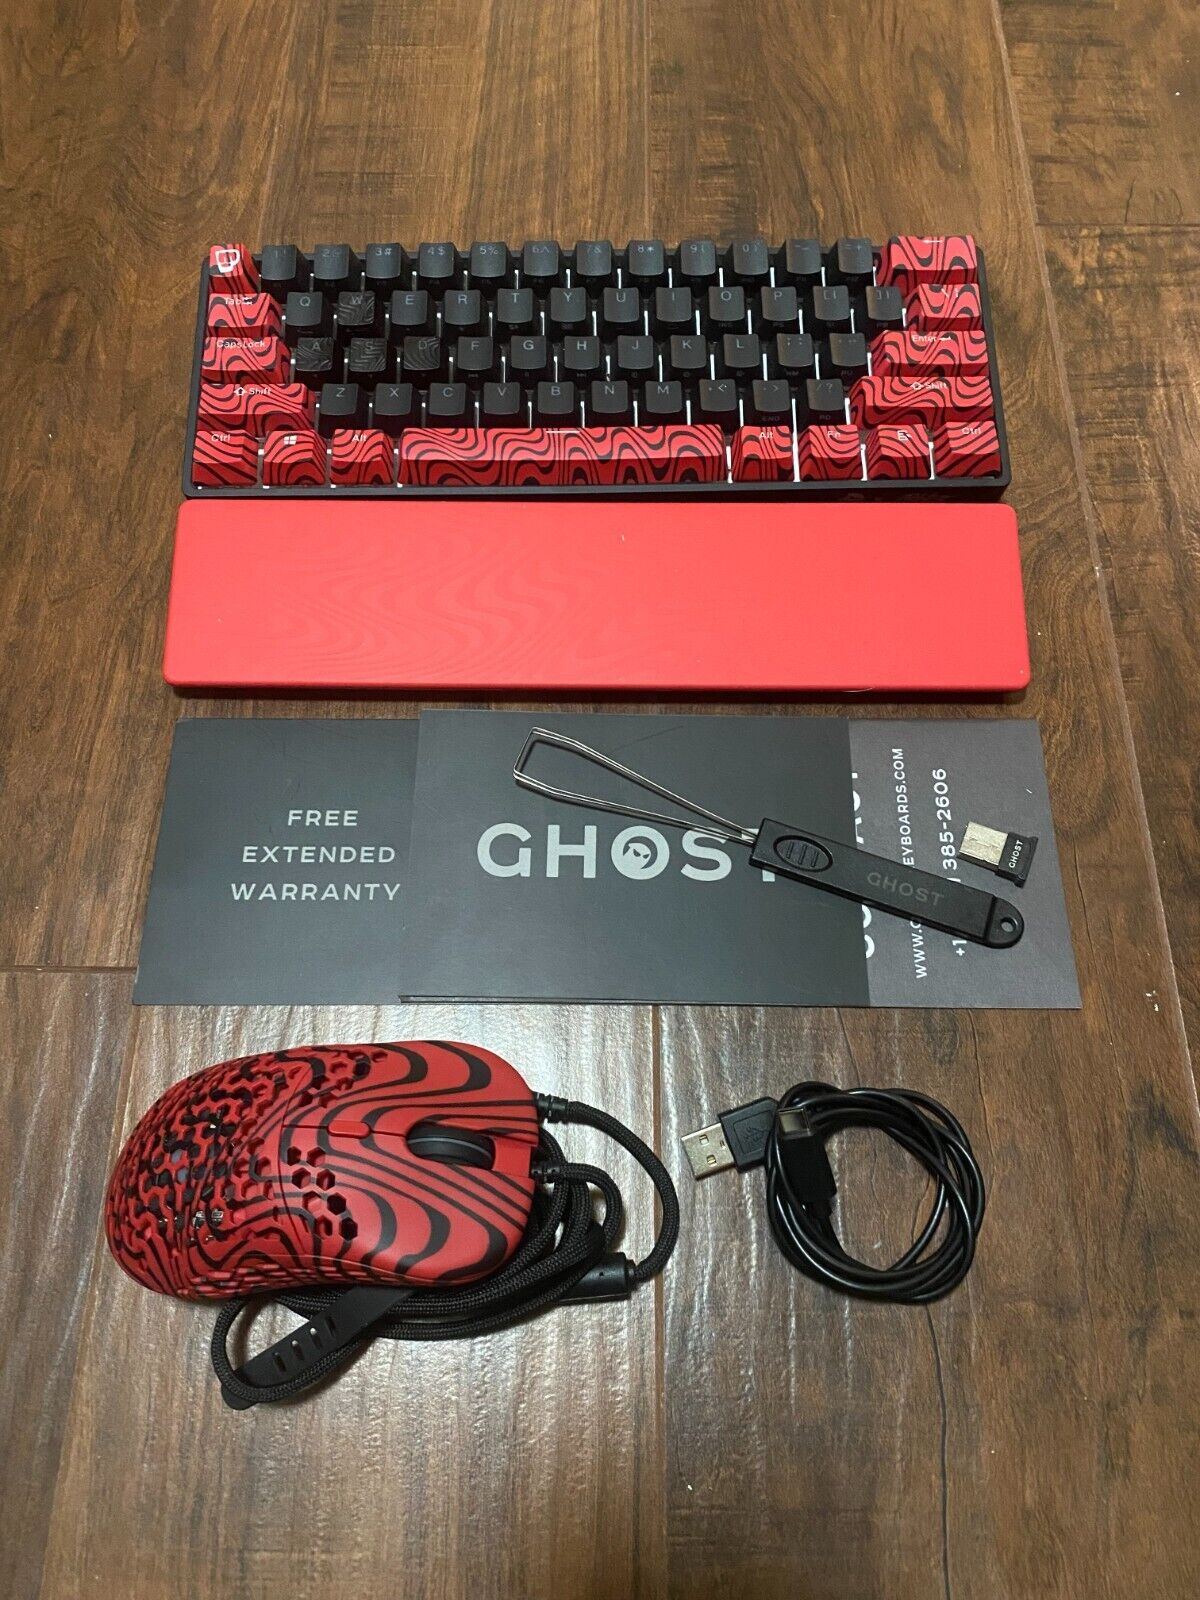 Ghost Pewdiepie A1 Wireless Aluminum Keyboard, Mouse , Wrist Rest